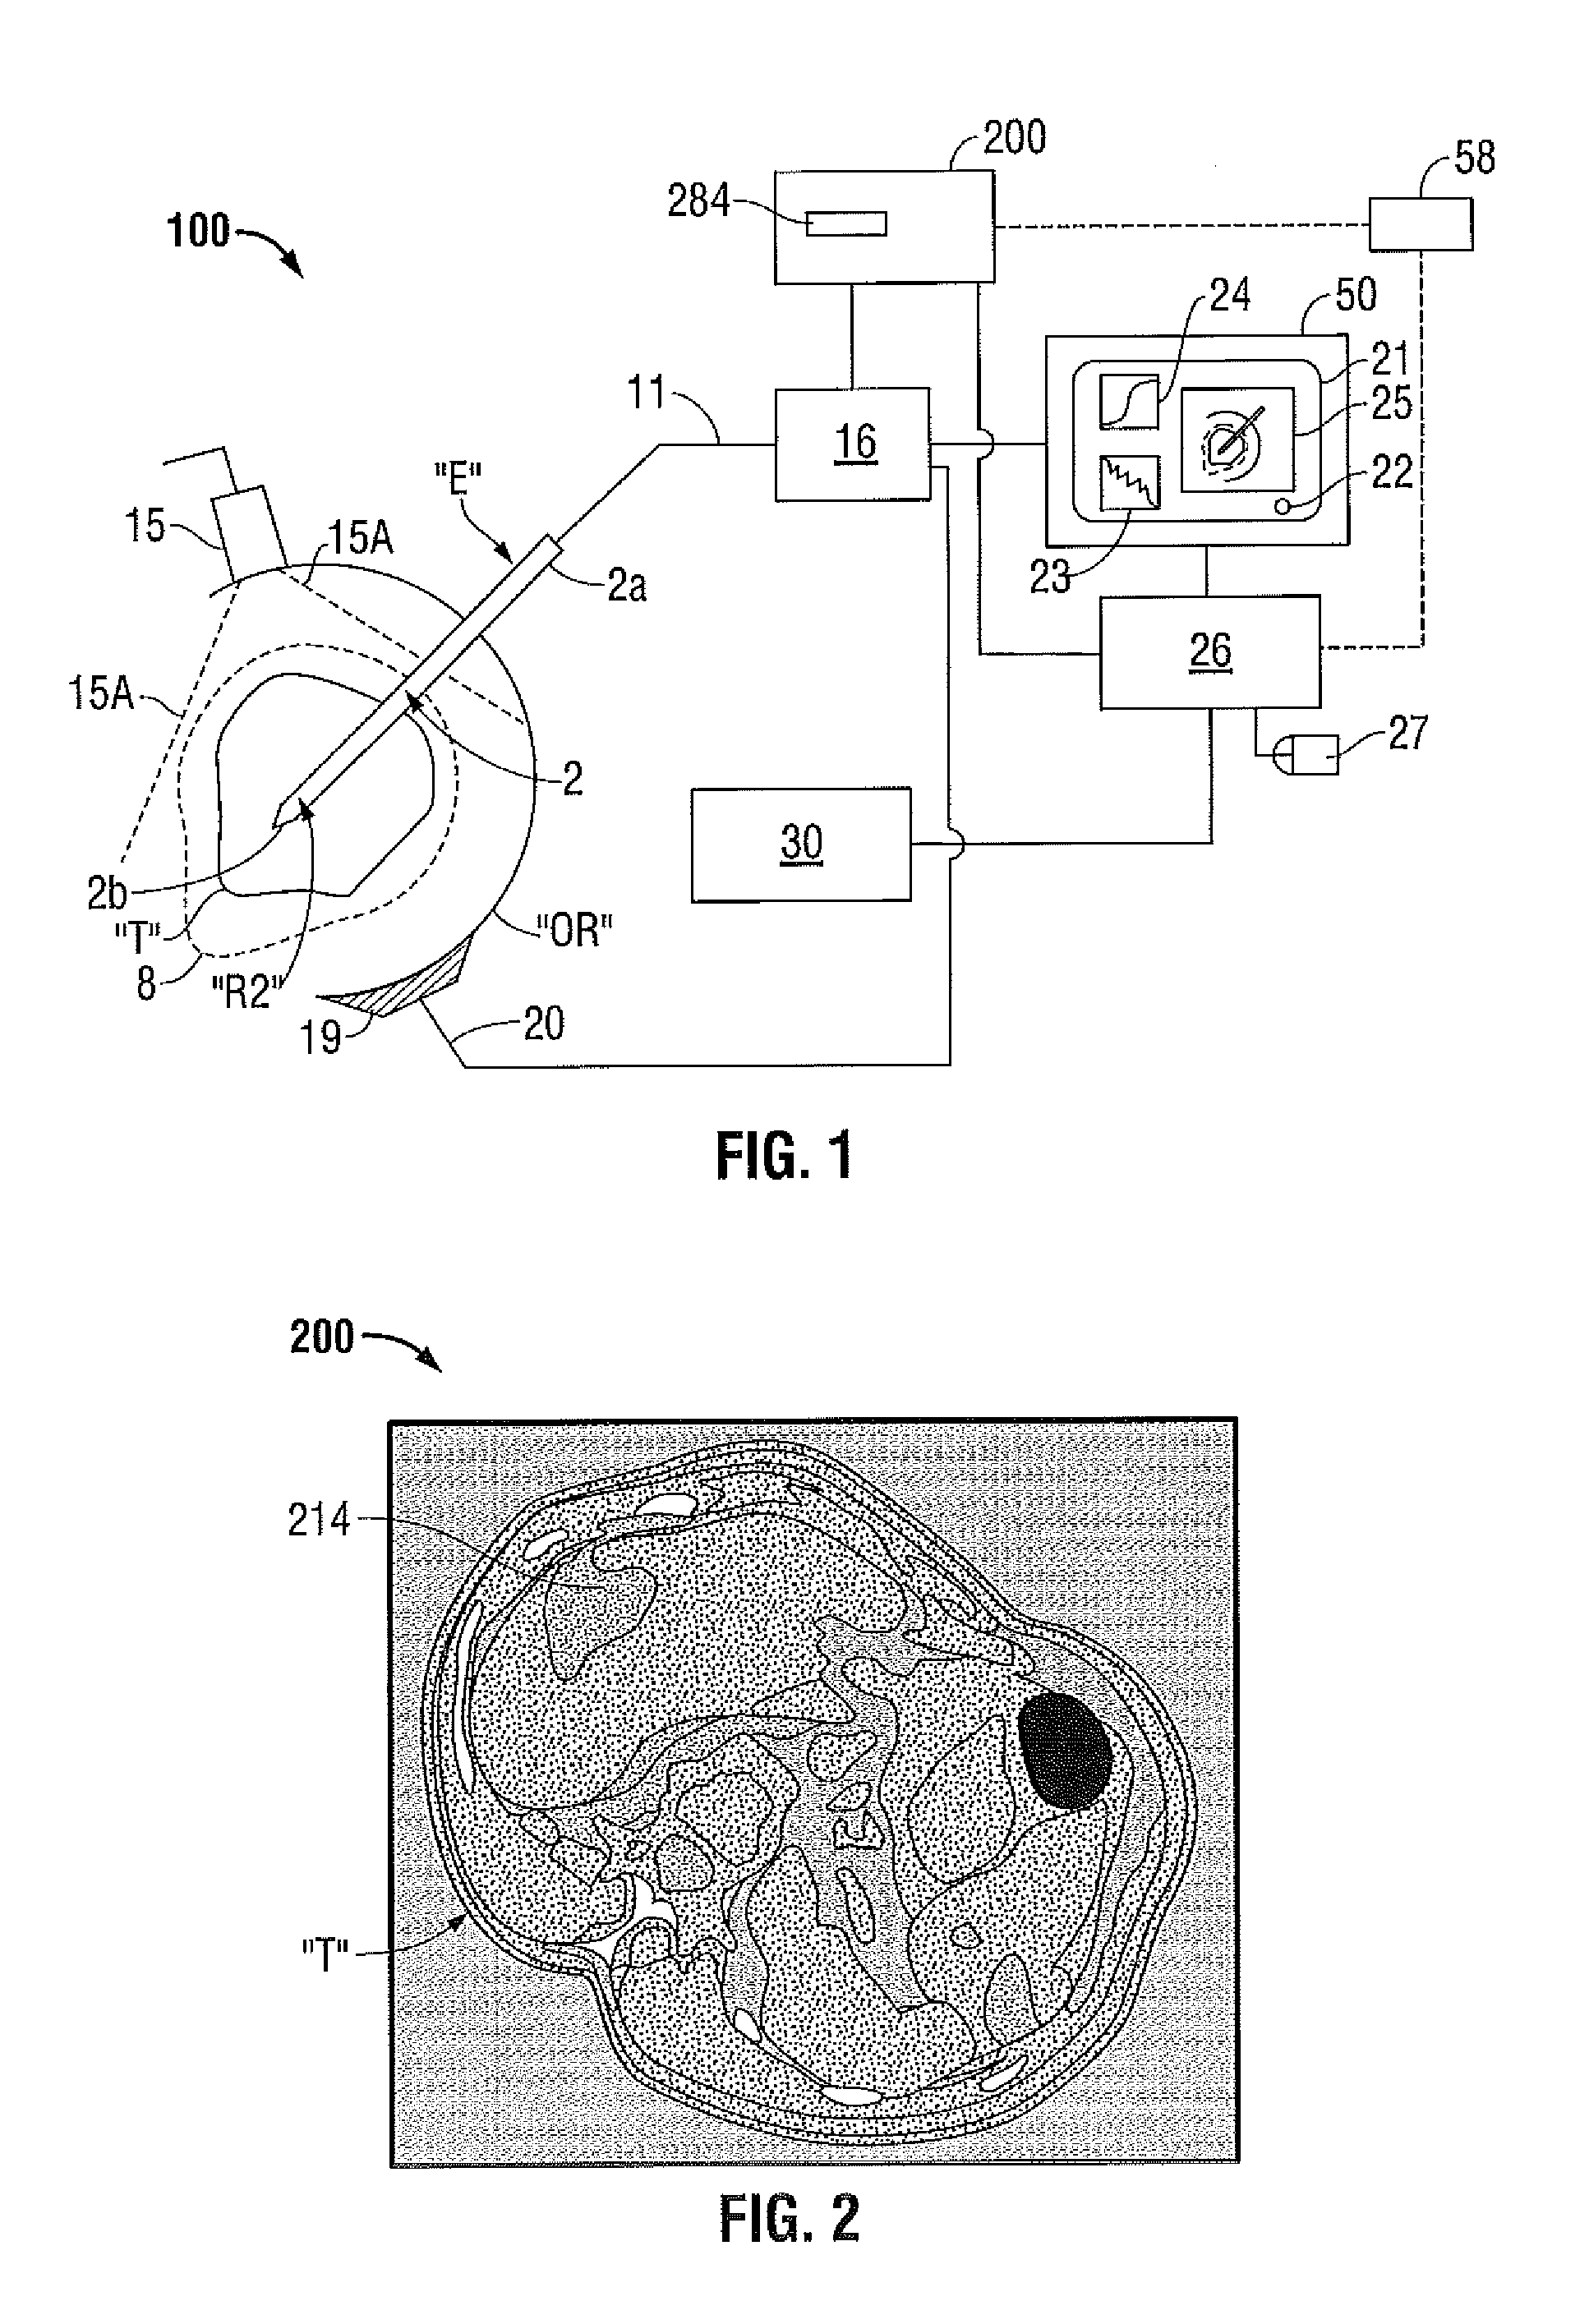 Methods for Image Analysis and Visualization of Medical Image Data Suitable for Use in Assessing Tissue Ablation and Systems and Methods for Controlling Tissue Ablation Using Same